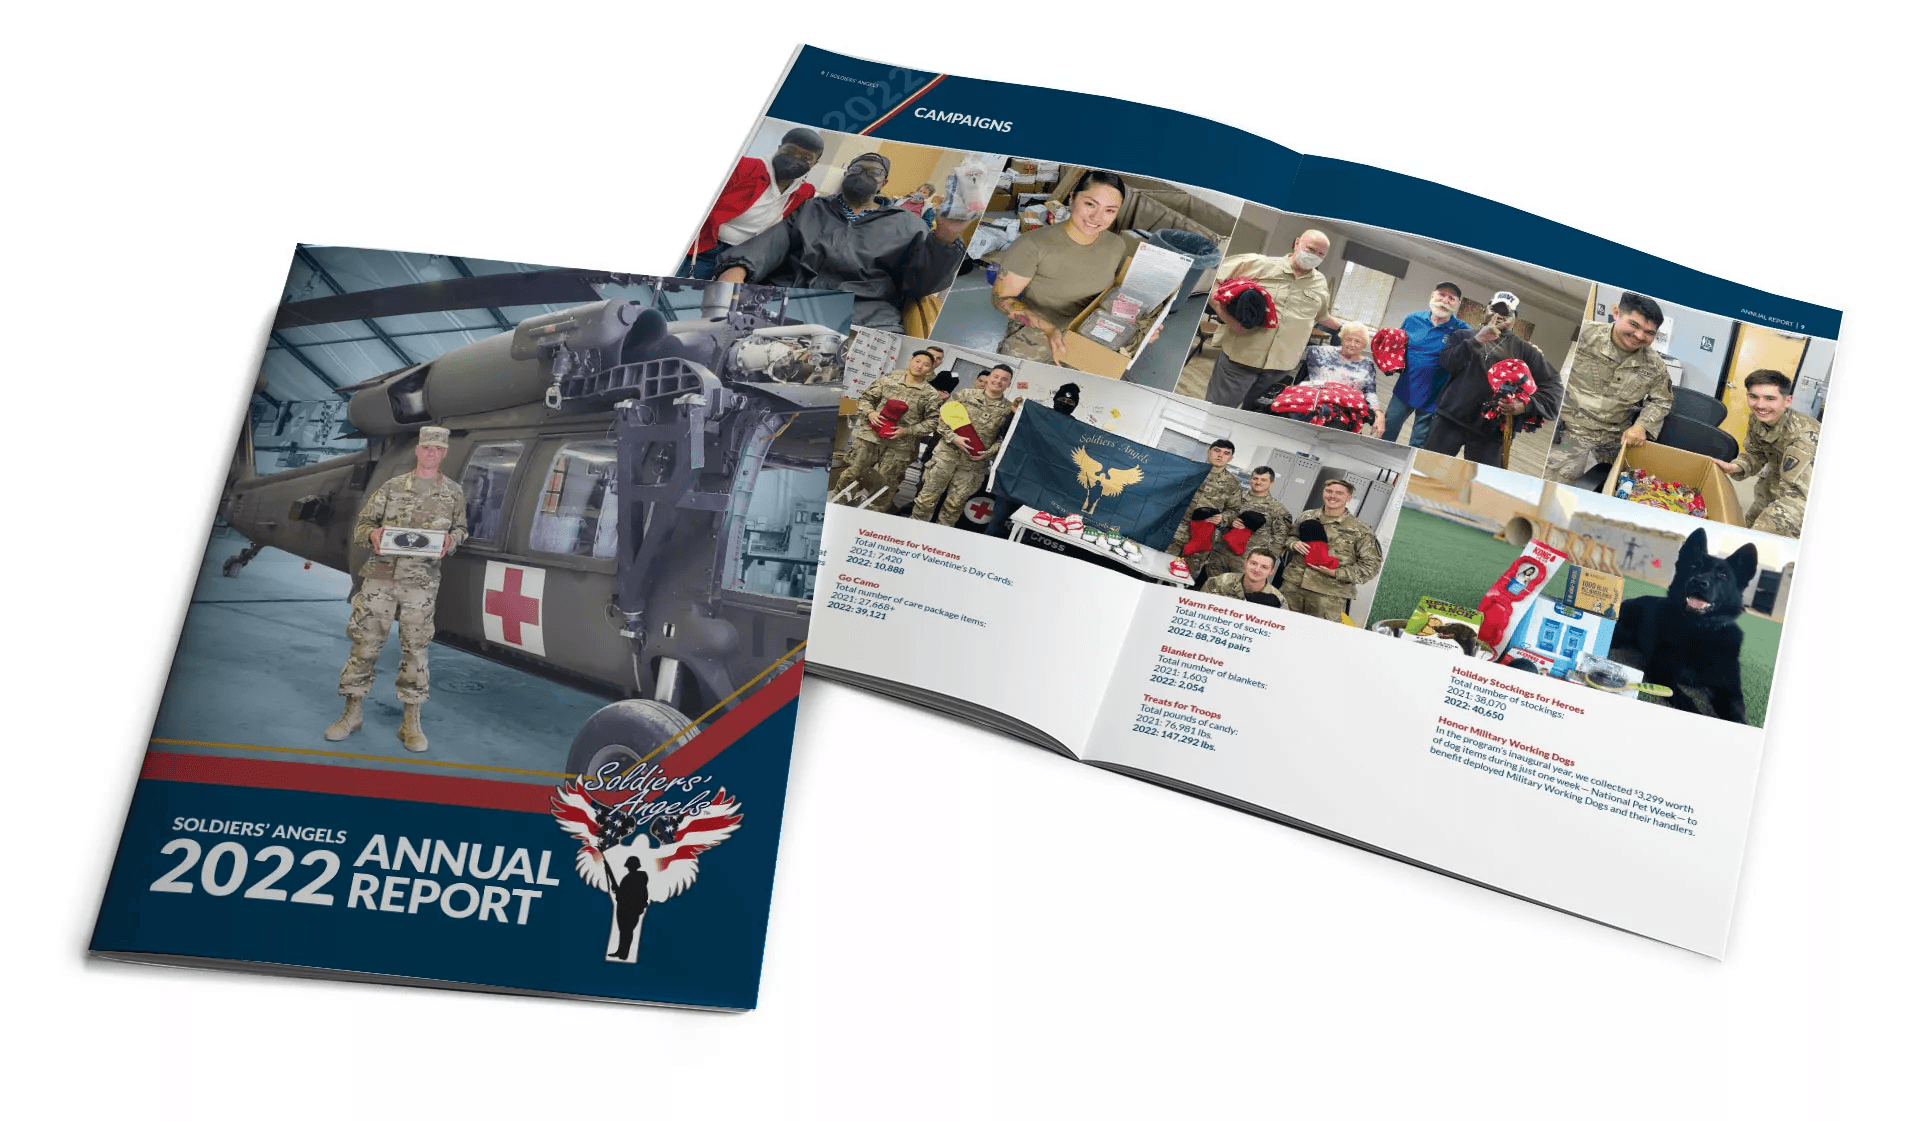 Soldier’s Angels 2022 Annual Report